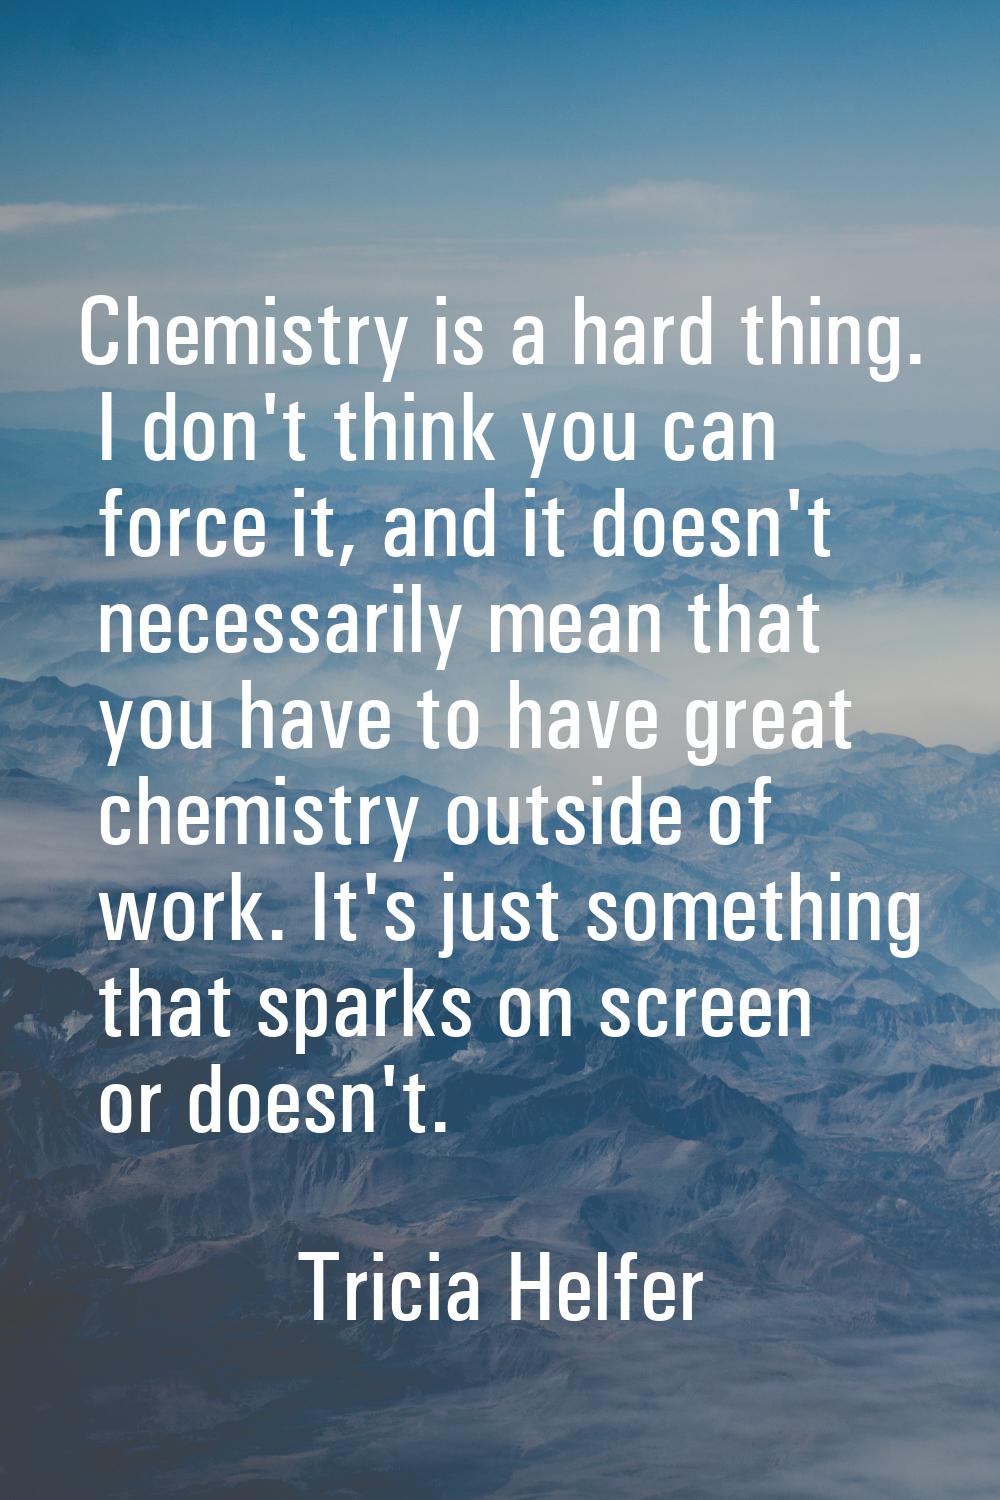 Chemistry is a hard thing. I don't think you can force it, and it doesn't necessarily mean that you